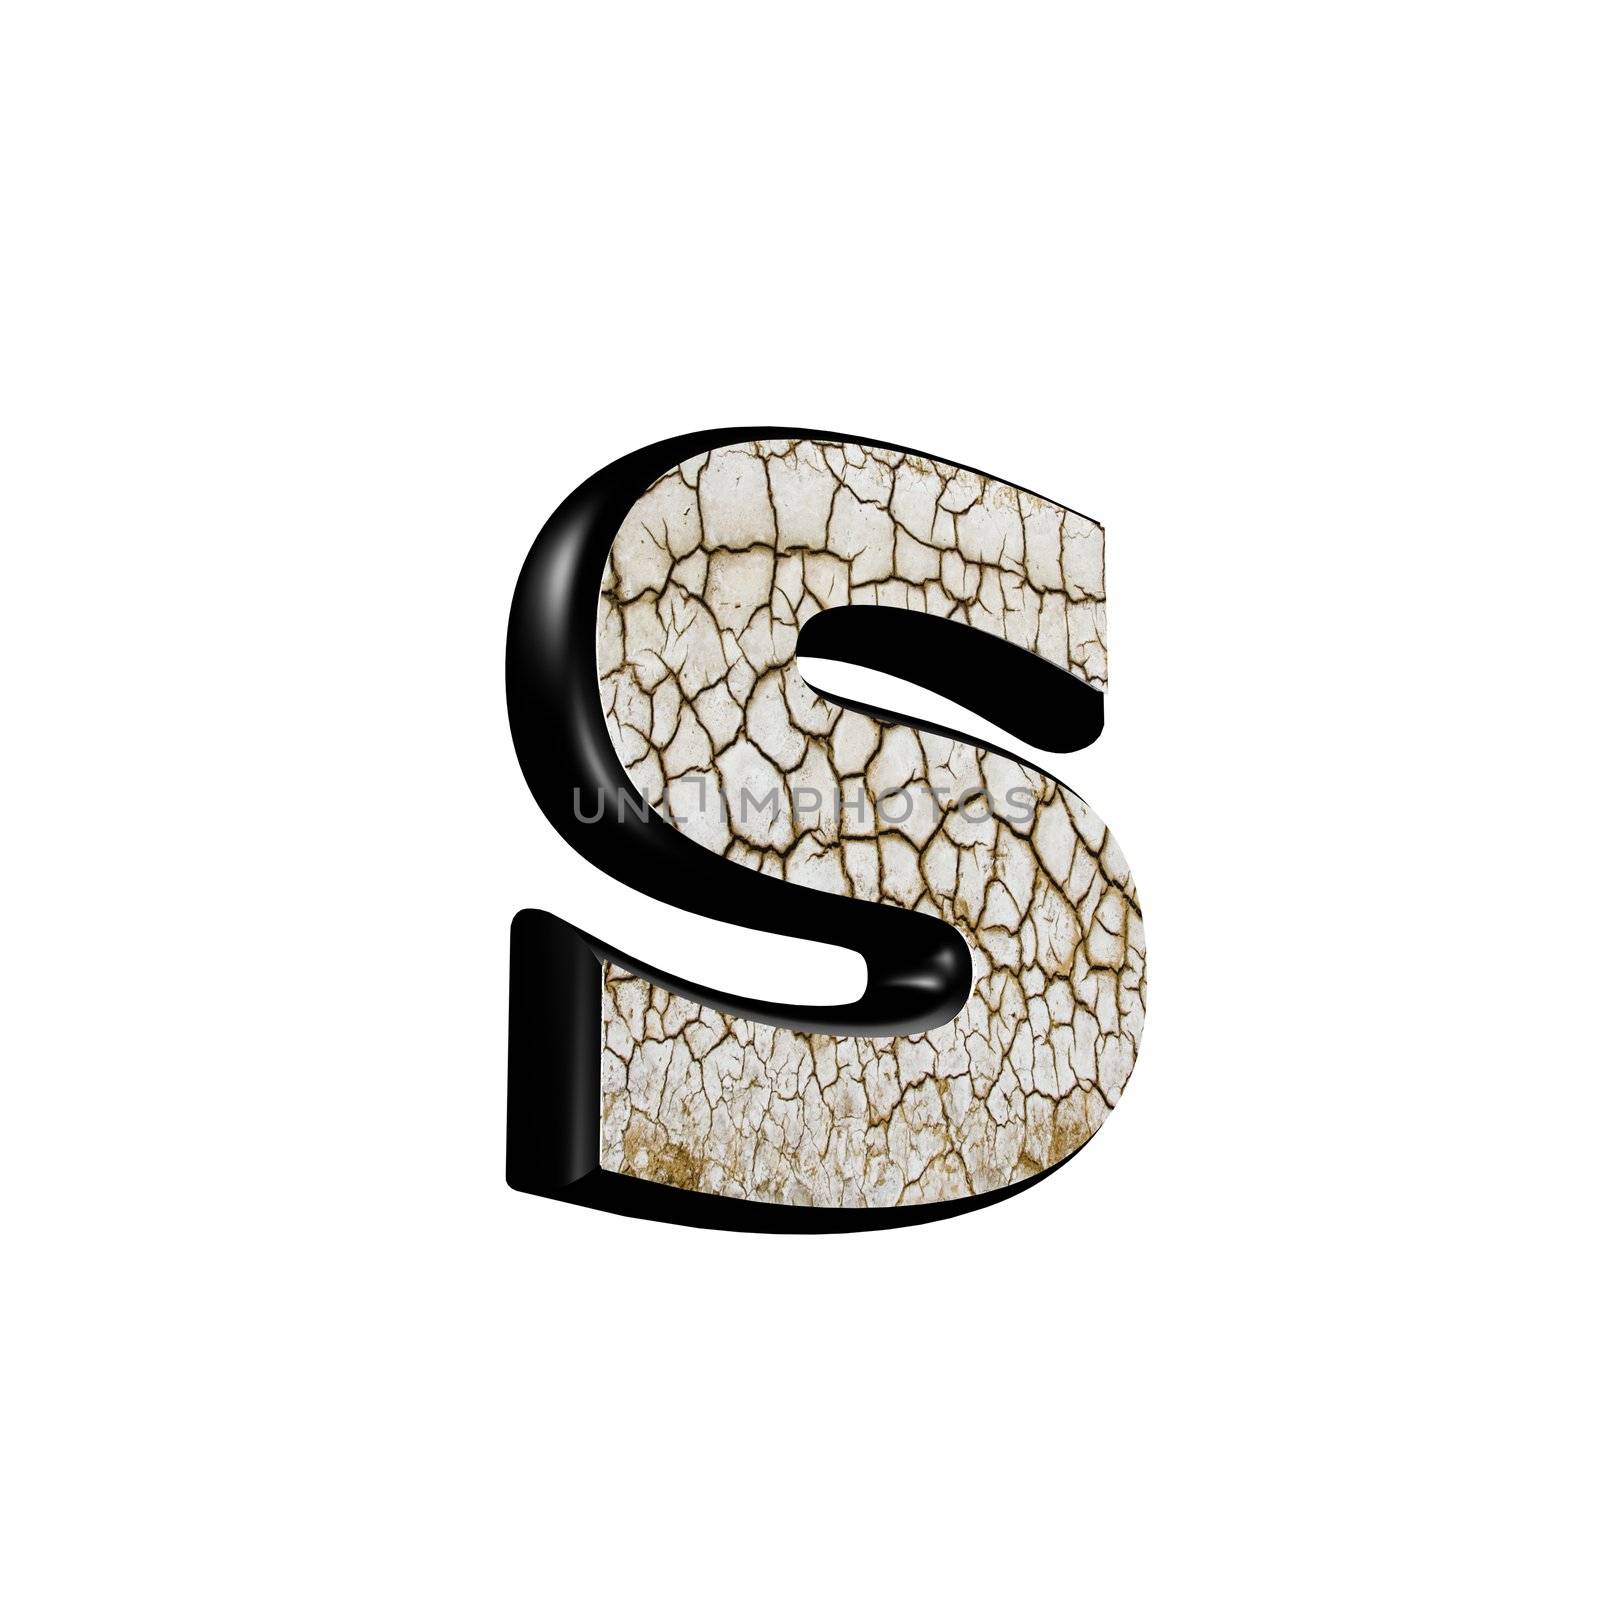 abstract 3d letter with dry ground texture - S by chrisroll